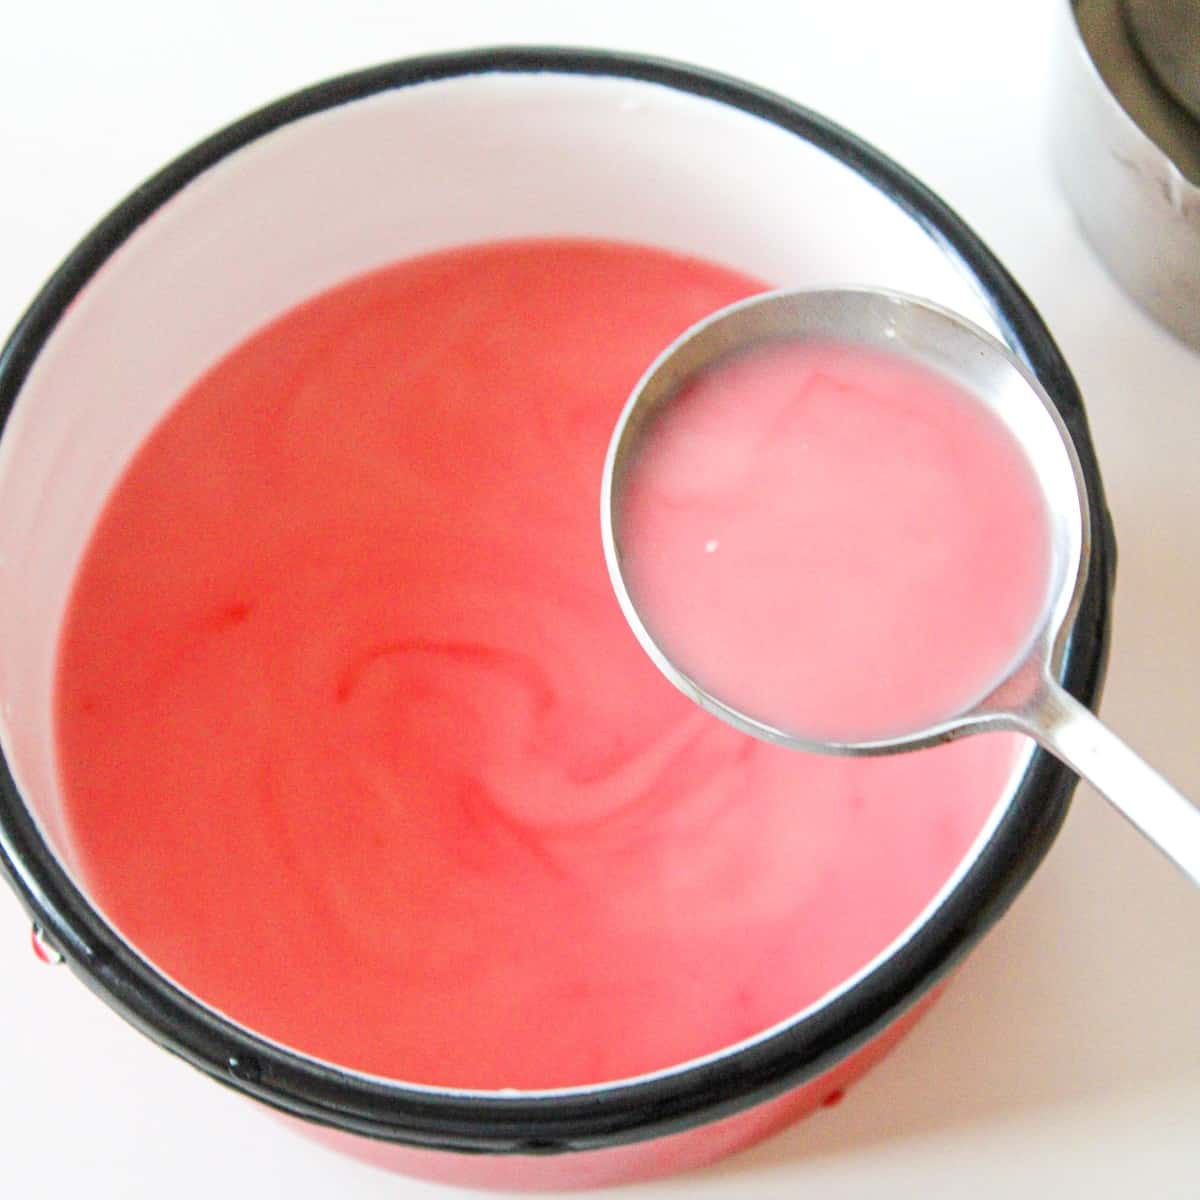 Add your dye to your red velvet cocoa, then stir until smooth.